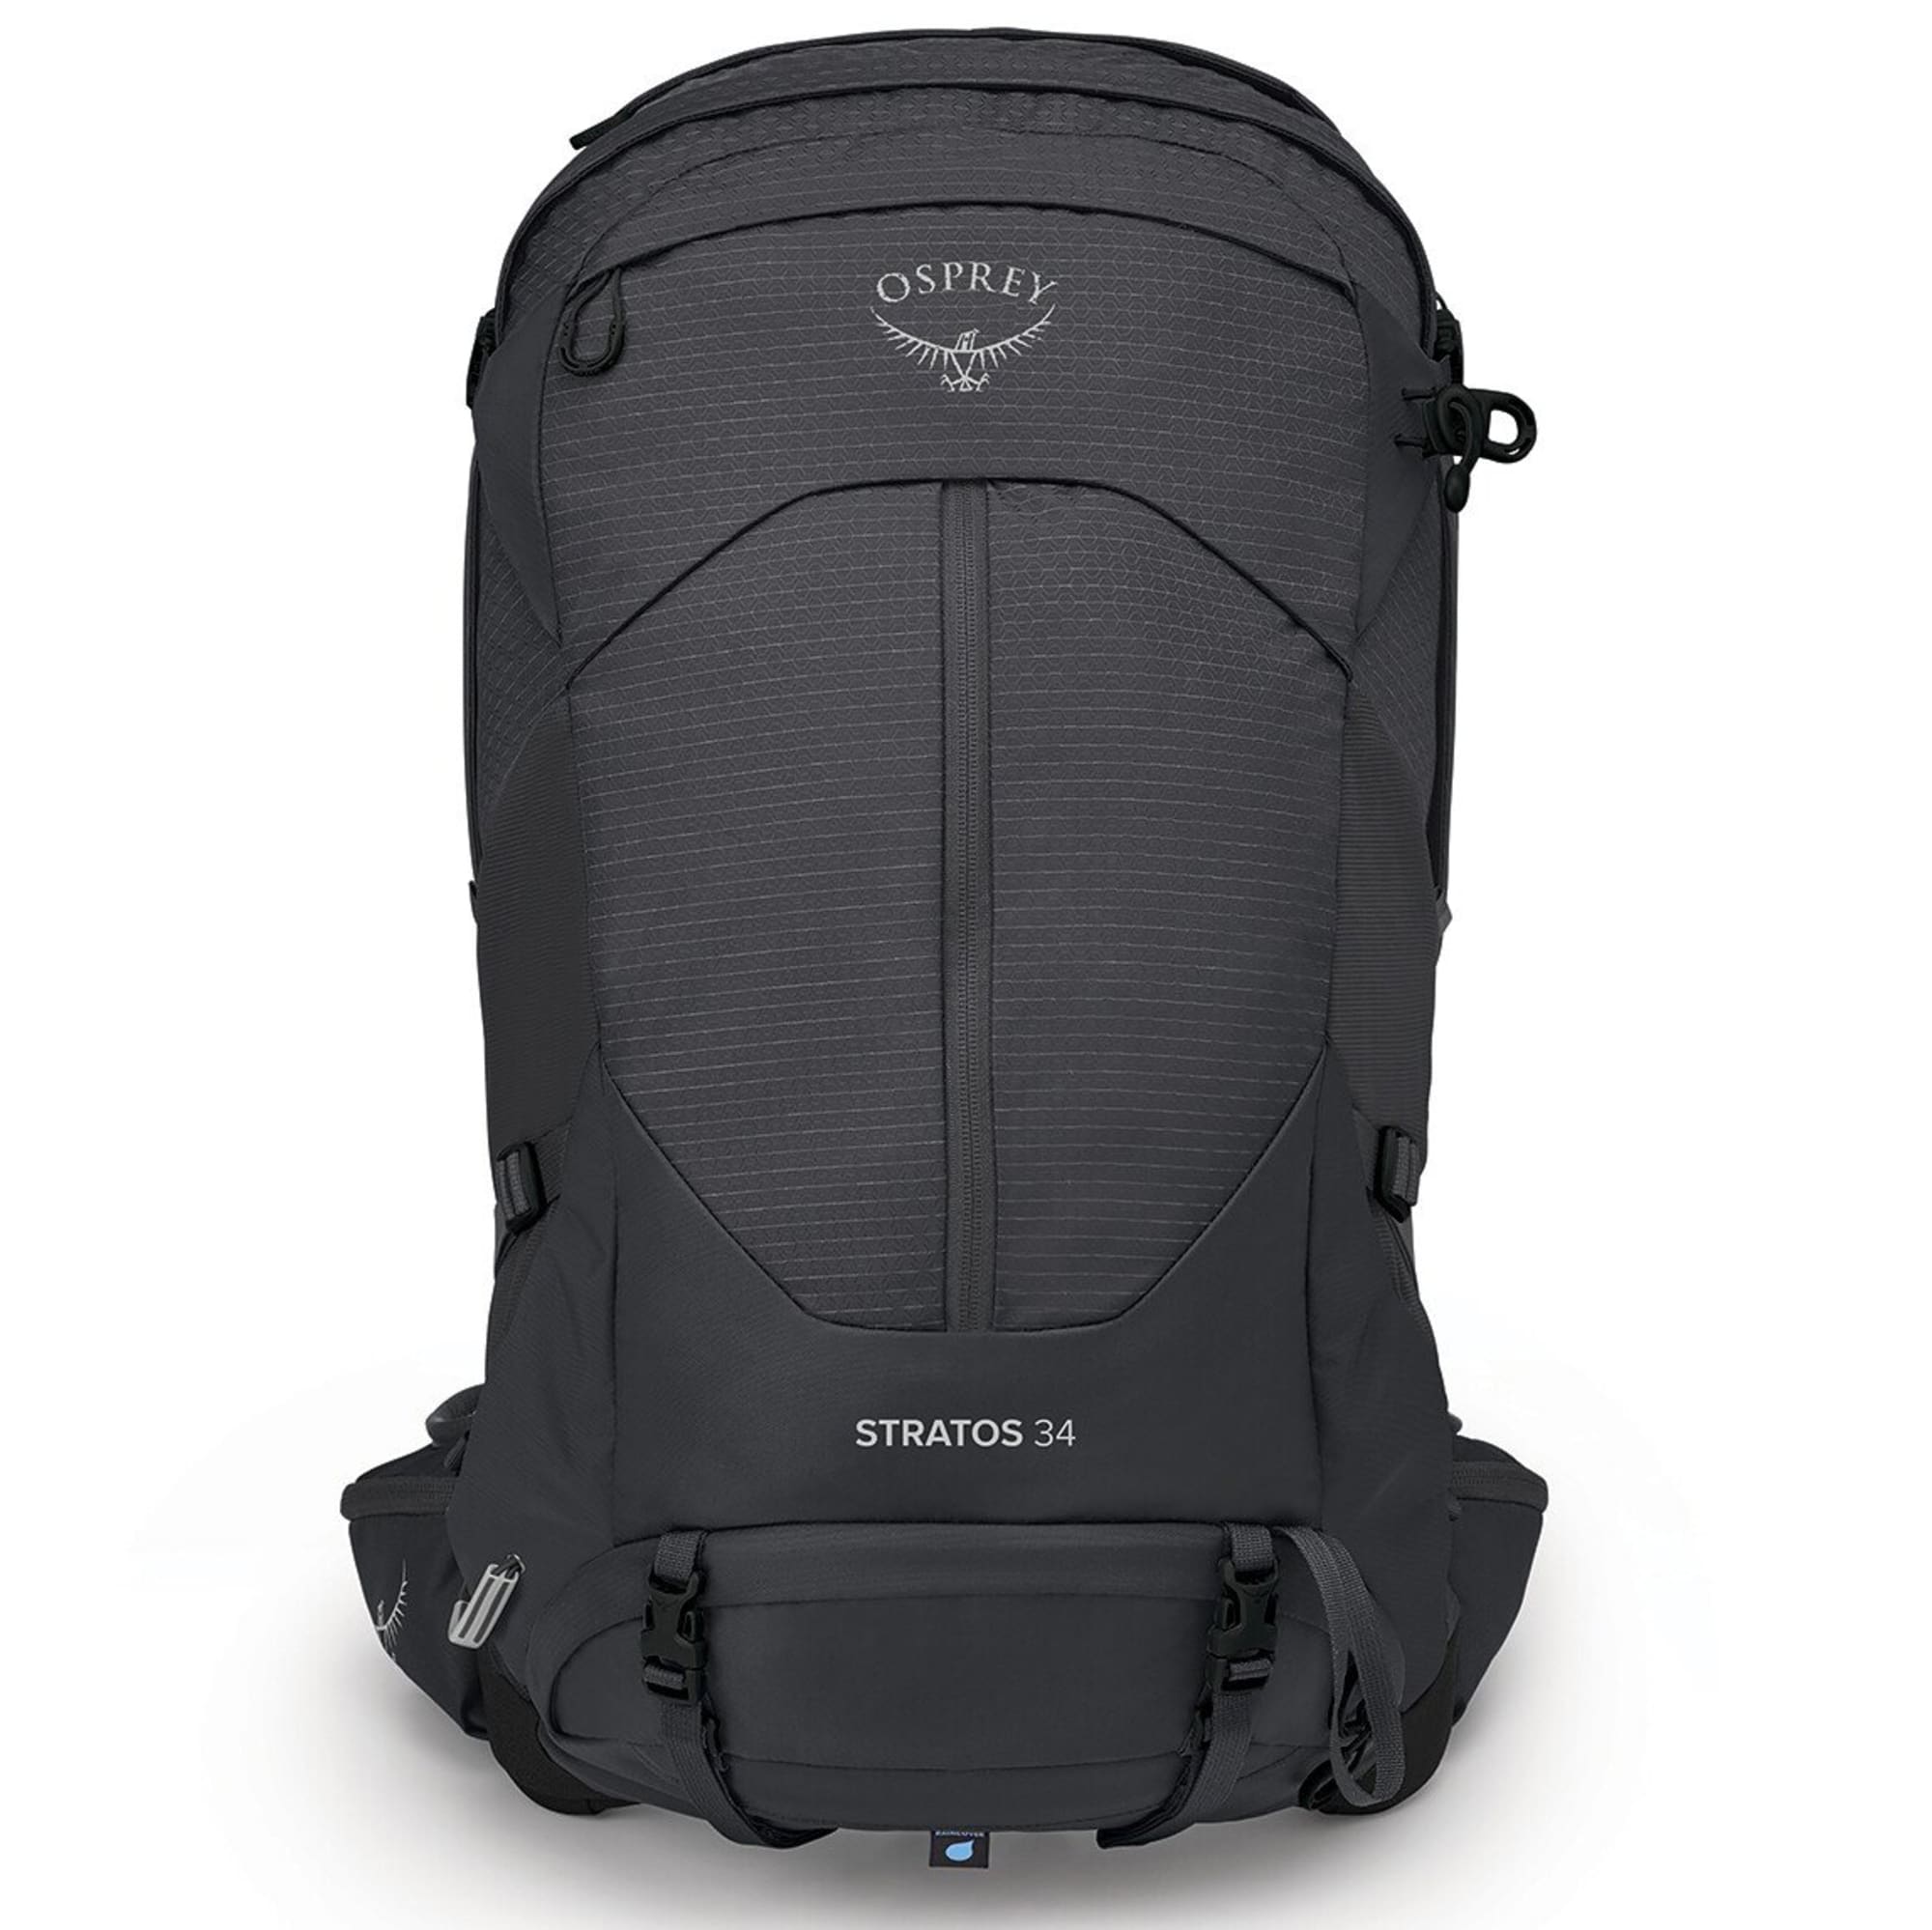 OSPREY Stratos 34L Pack - Eastern Mountain Sports